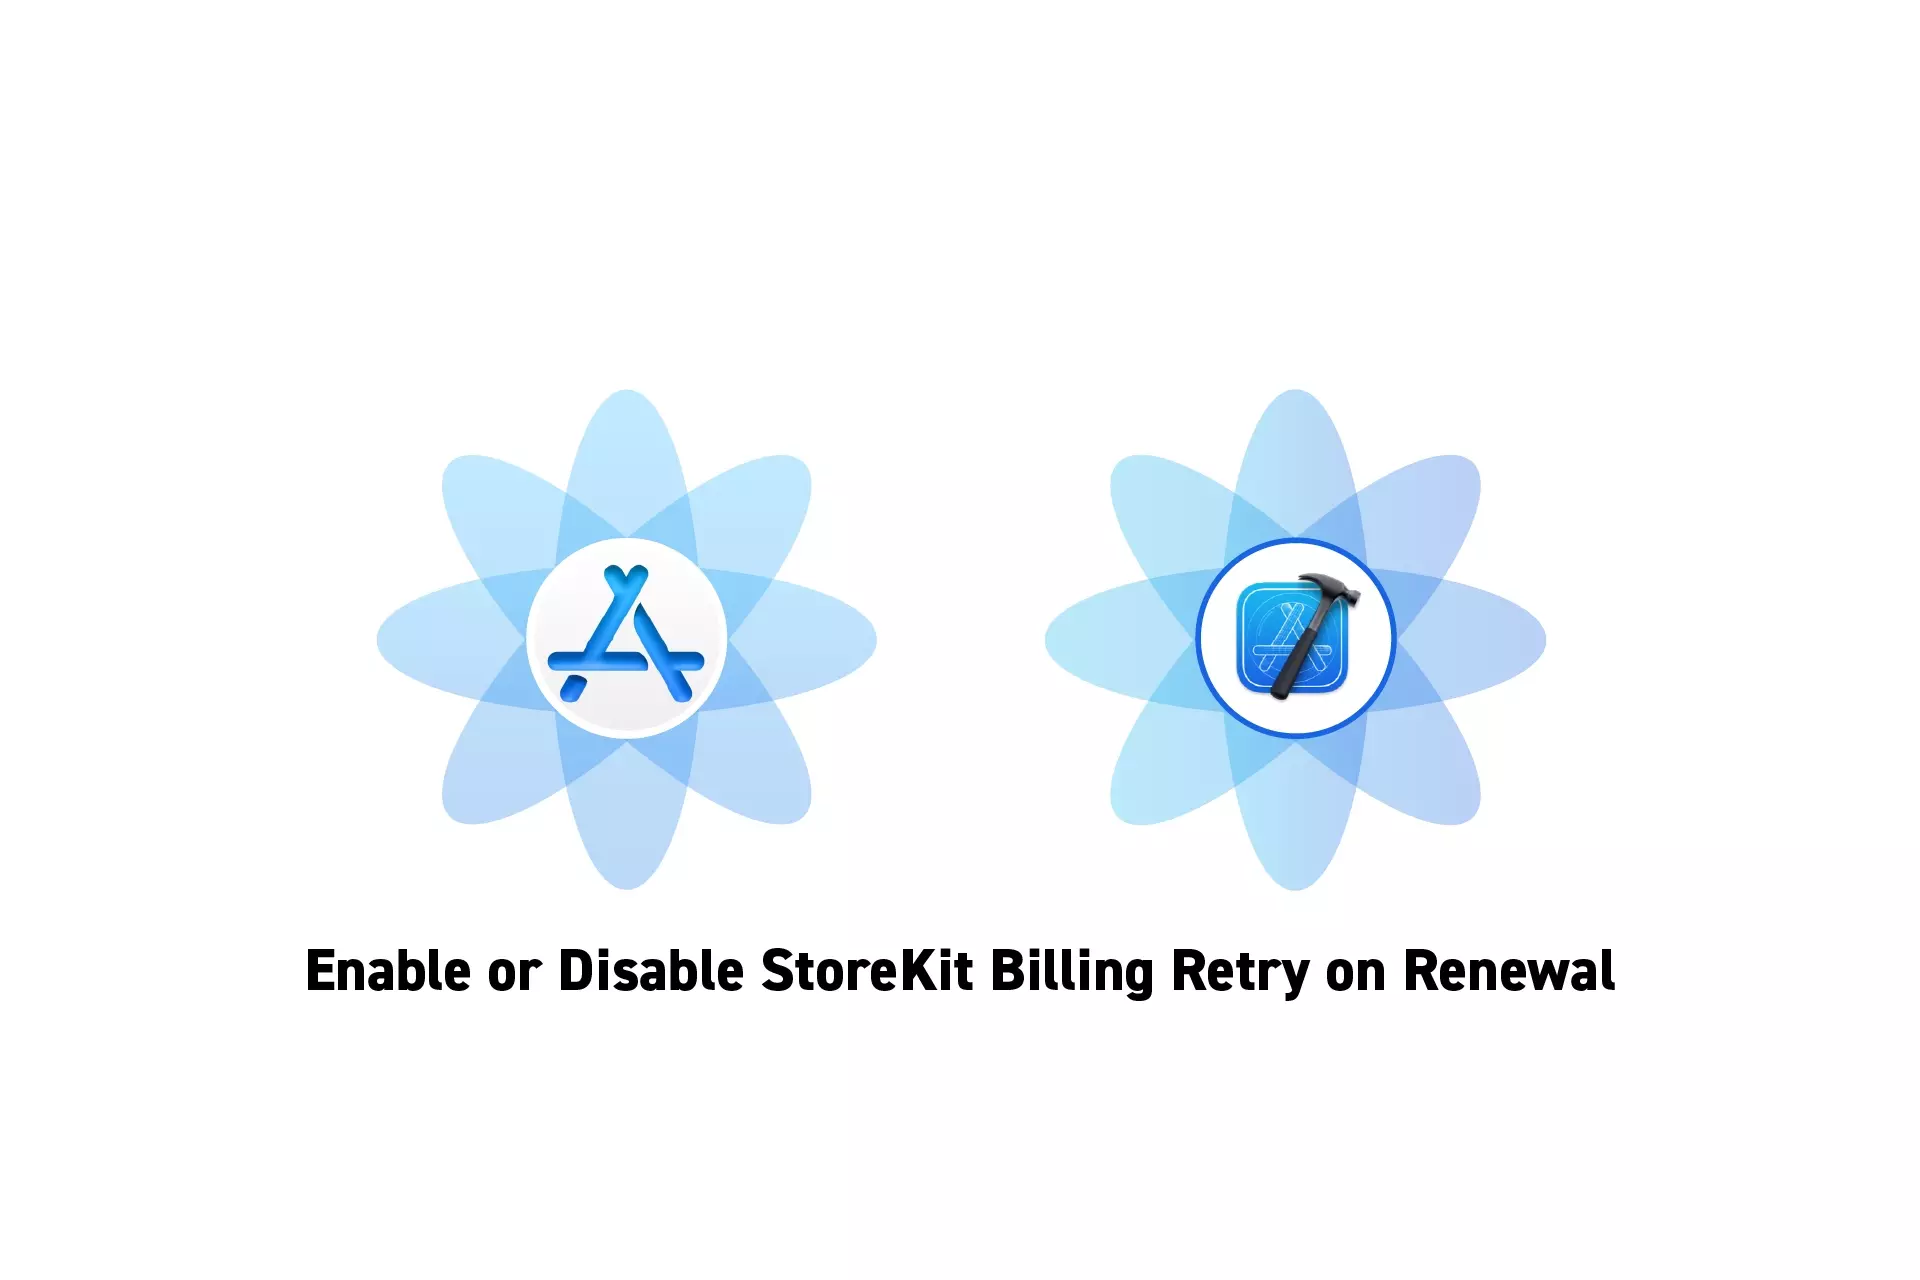 Two flowers that represent StoreKit and Xcode side by side with the text "Enable or Disable StoreKit Billing Grace Period" beneath them.